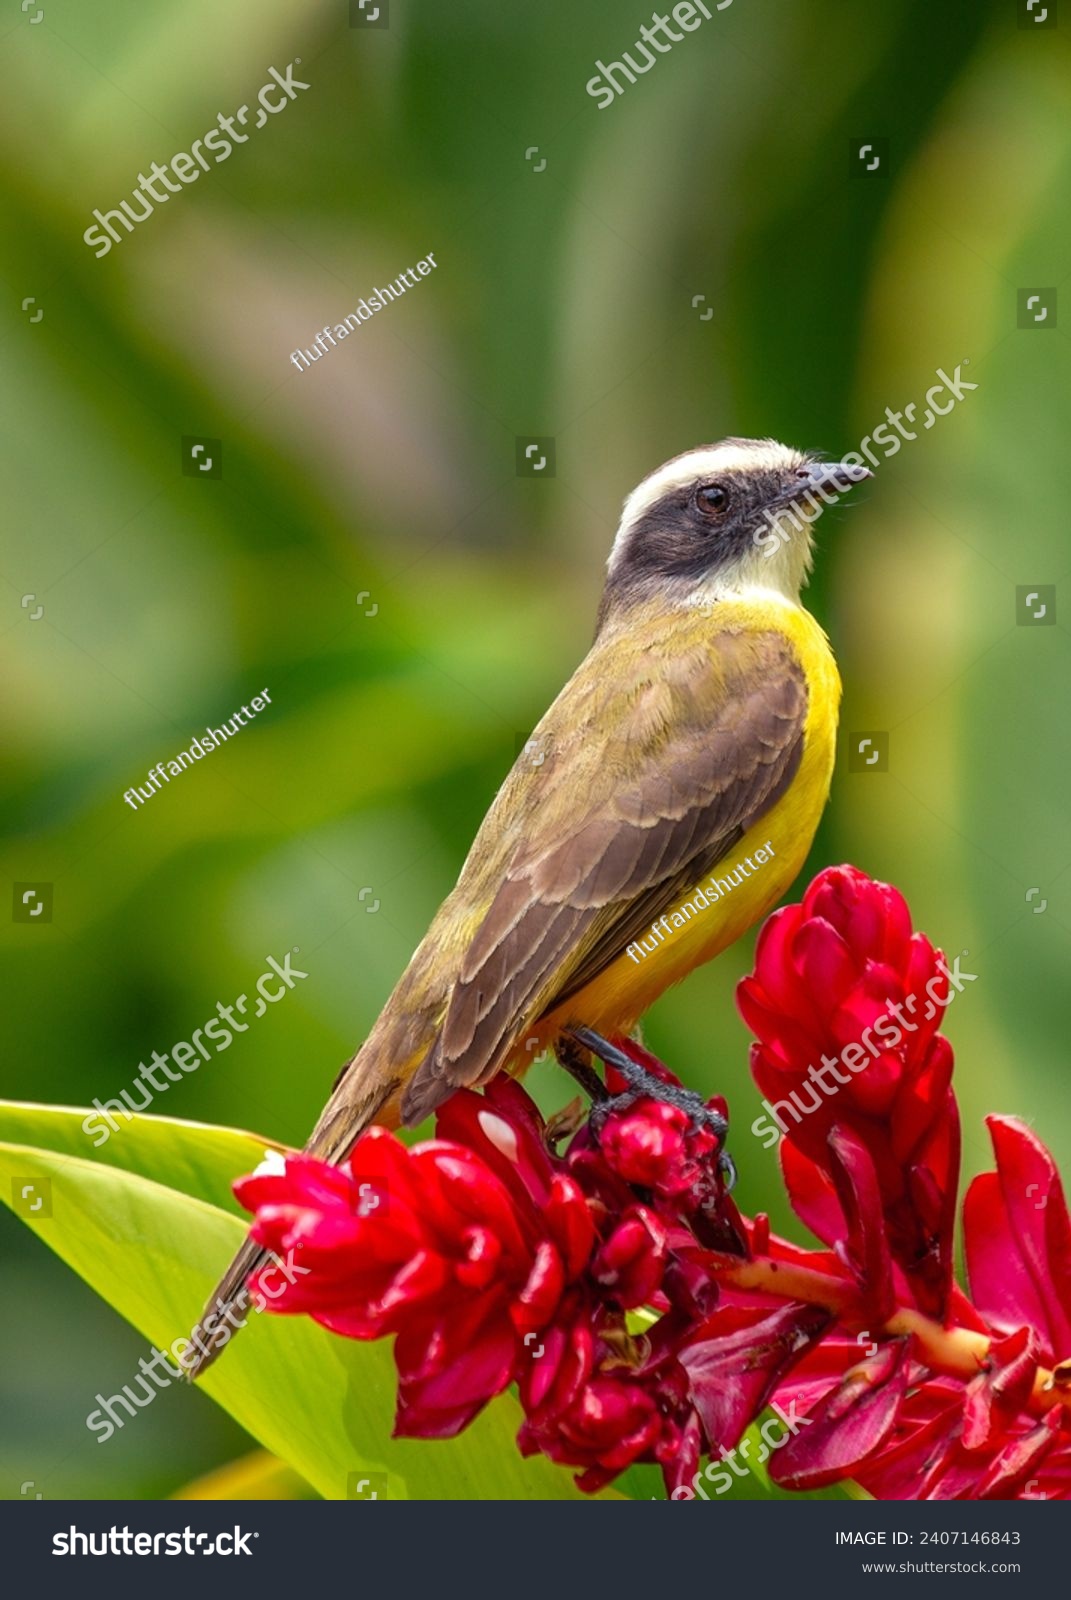 Myiozetetes similis, the Social Flycatcher, graces Central and South American habitats with its sociable nature. This small bird adds liveliness to the diverse tapestry of tropical landscapes. #2407146843